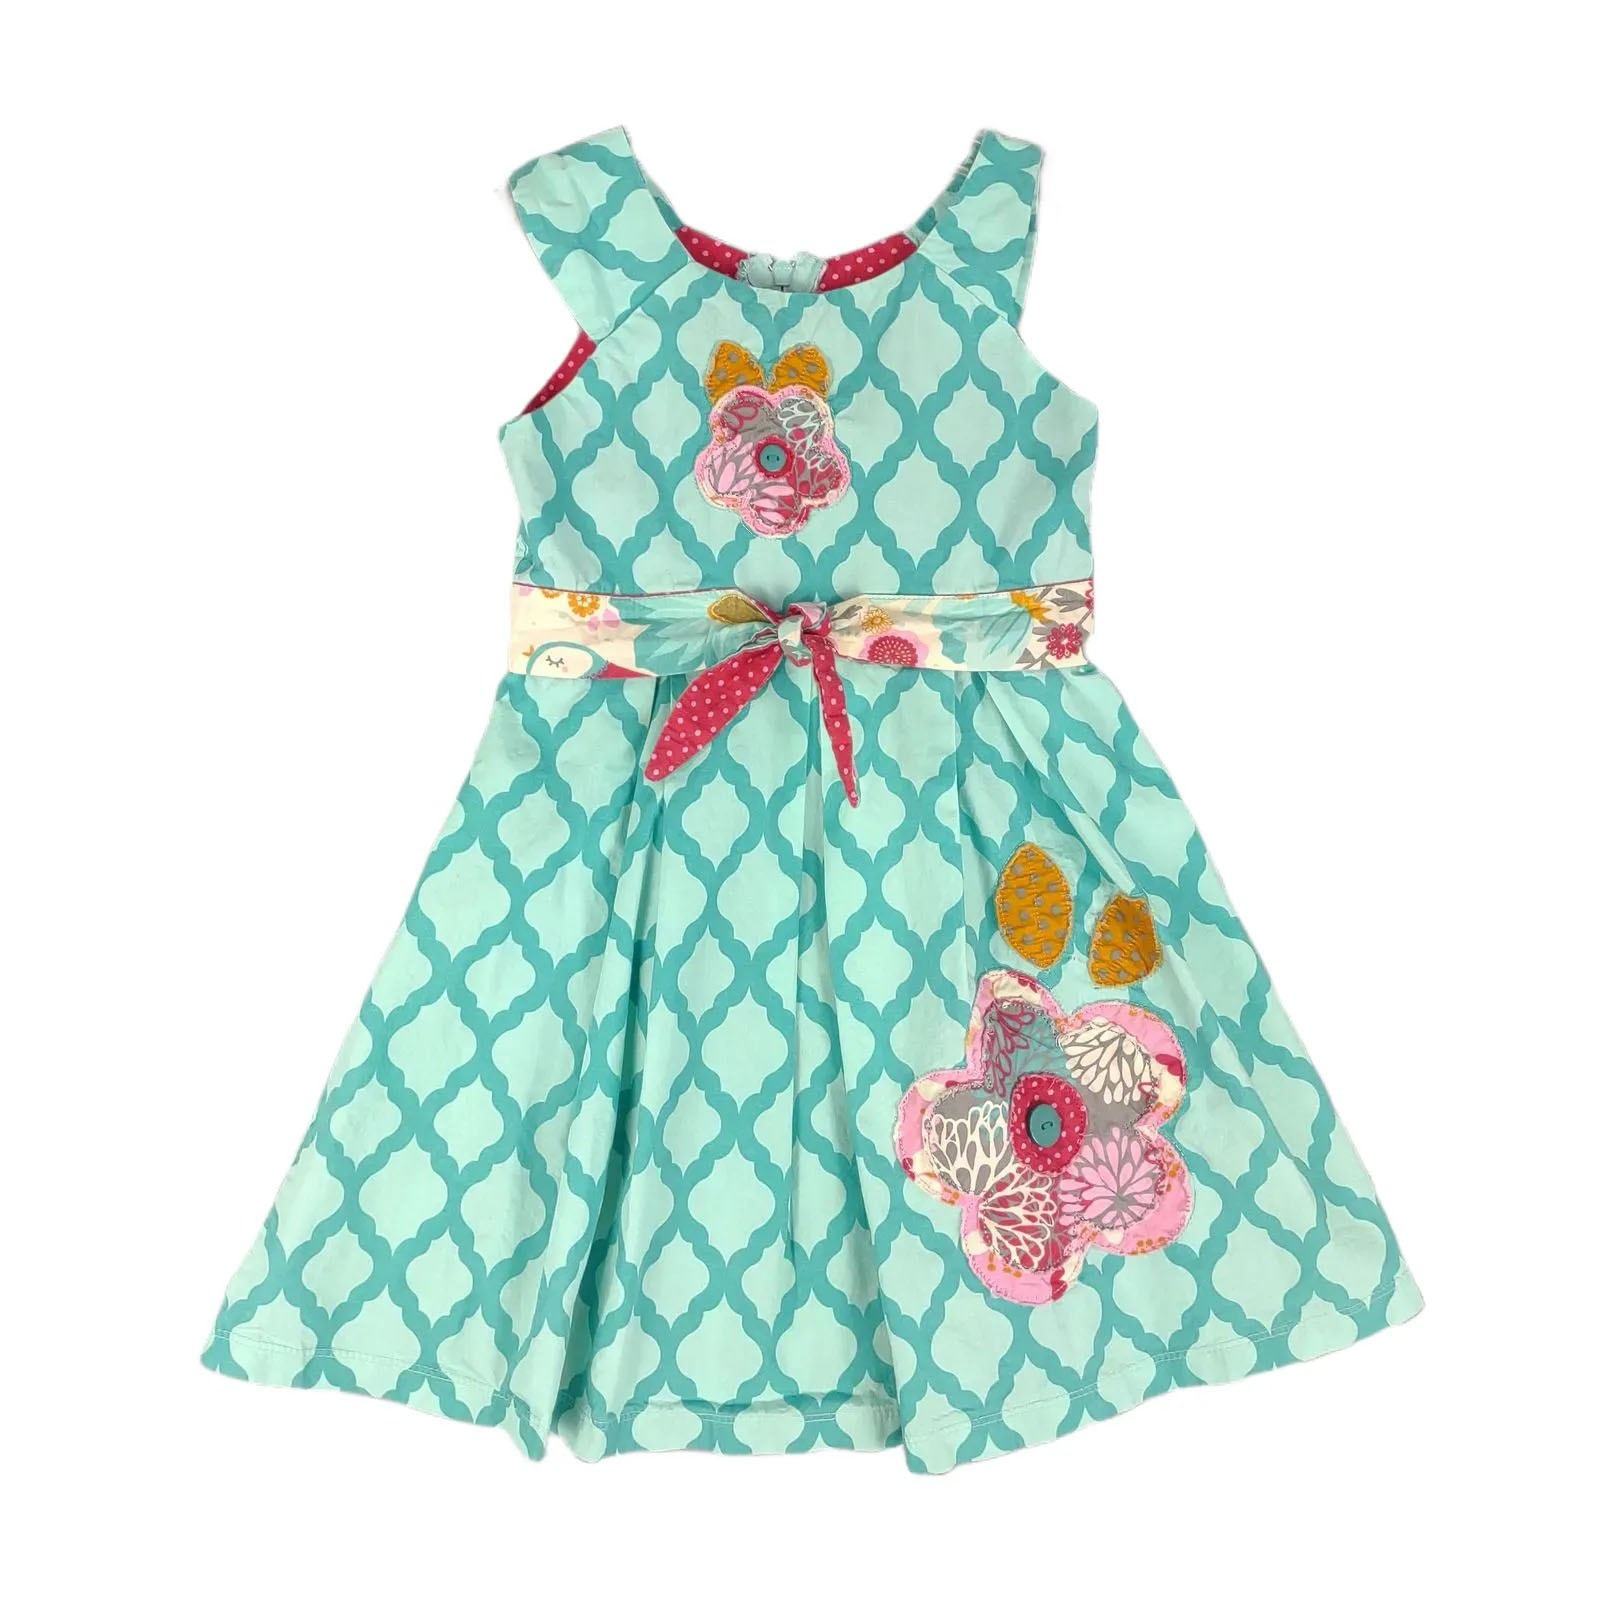 Primary image for JELLY THE PUG Kotori Collection Alex Sun Dress, Toddler Girls' 5, Blue Floral